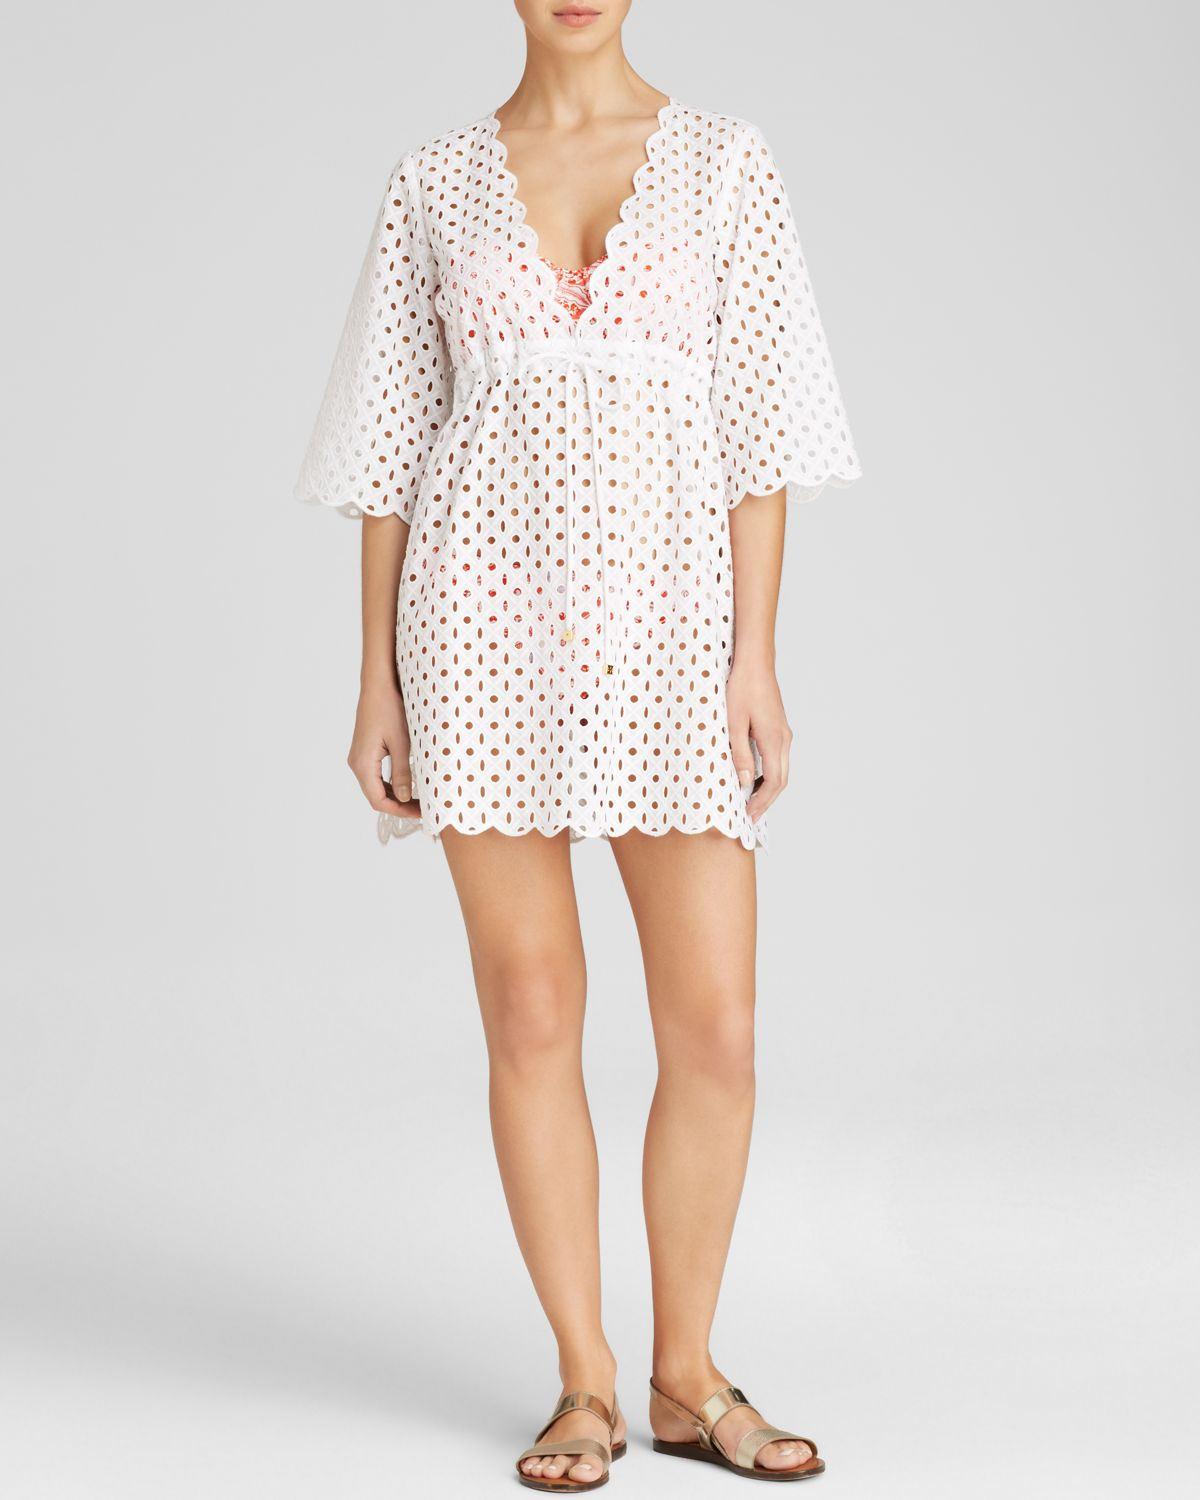 Tory Burch Broiderie Eyelet Swim Cover ...